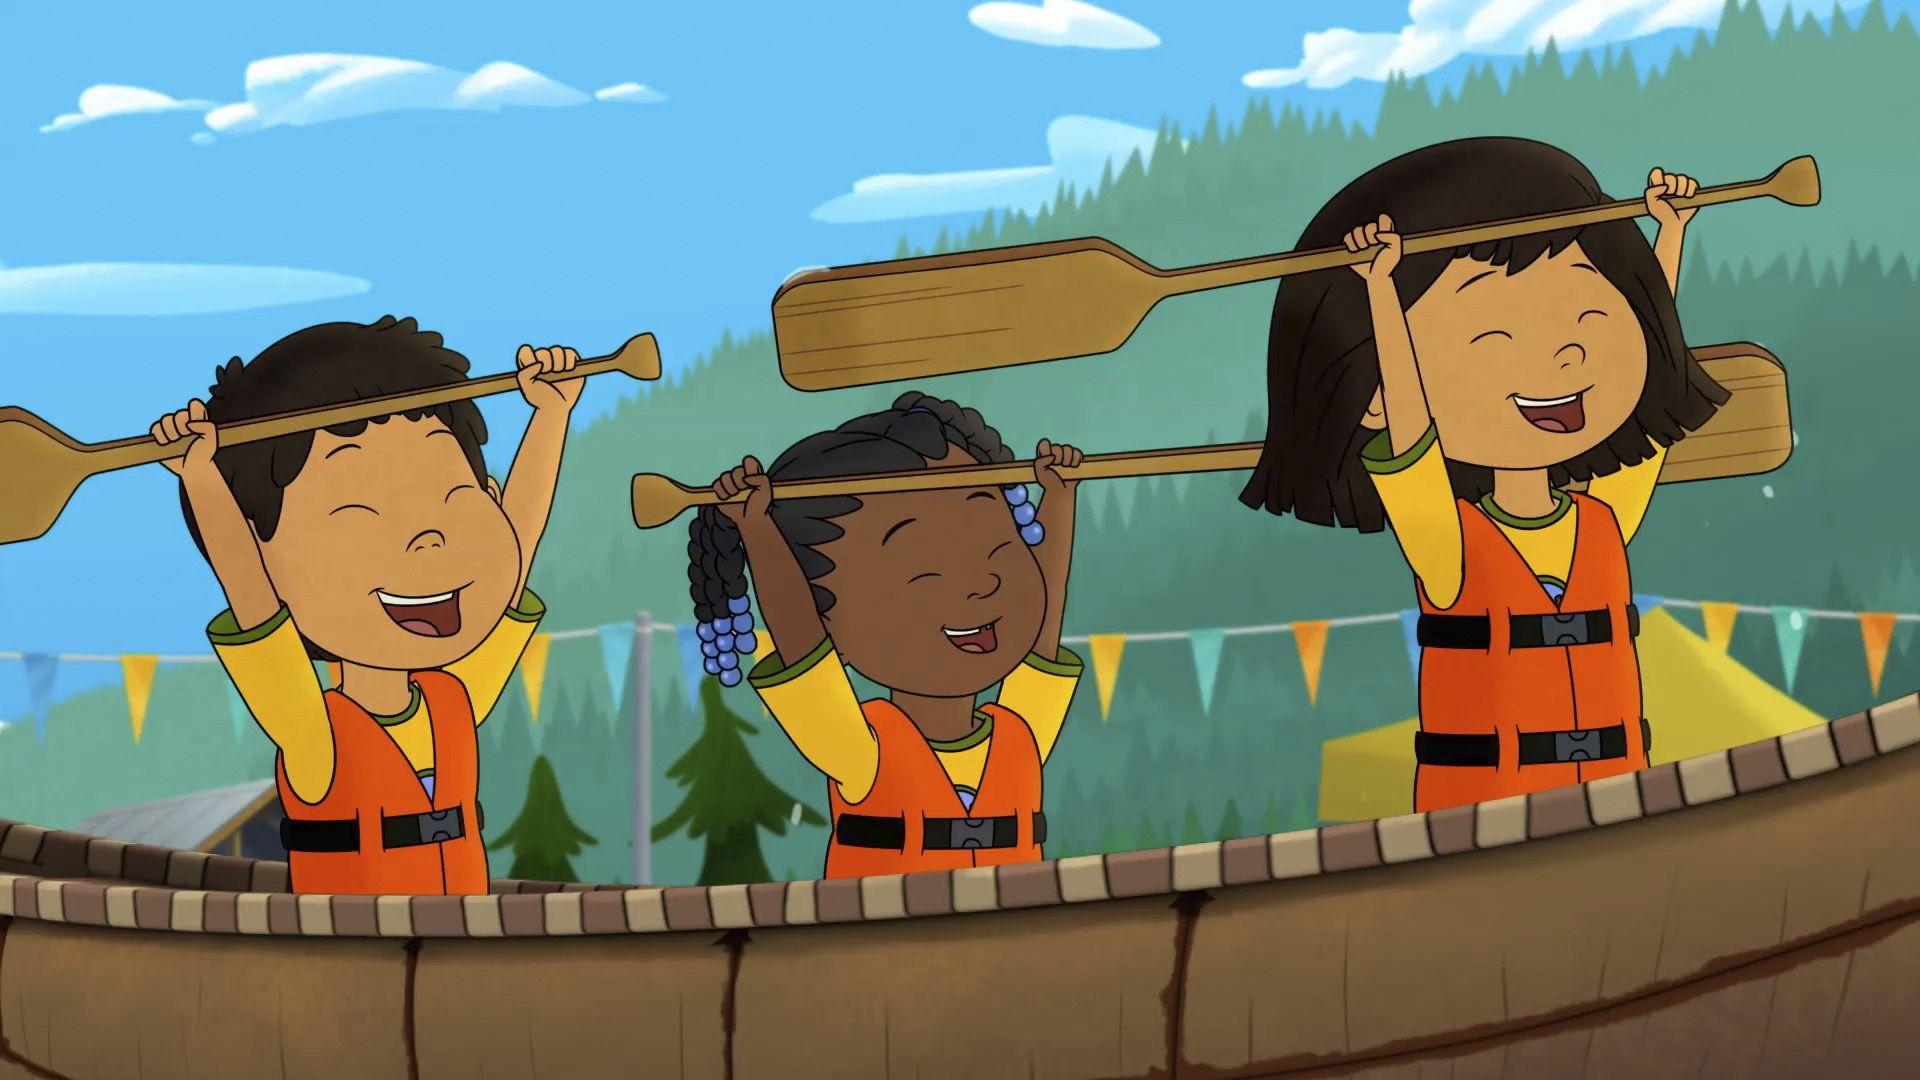 Alaska Native girl leads animated kids TV show in US first